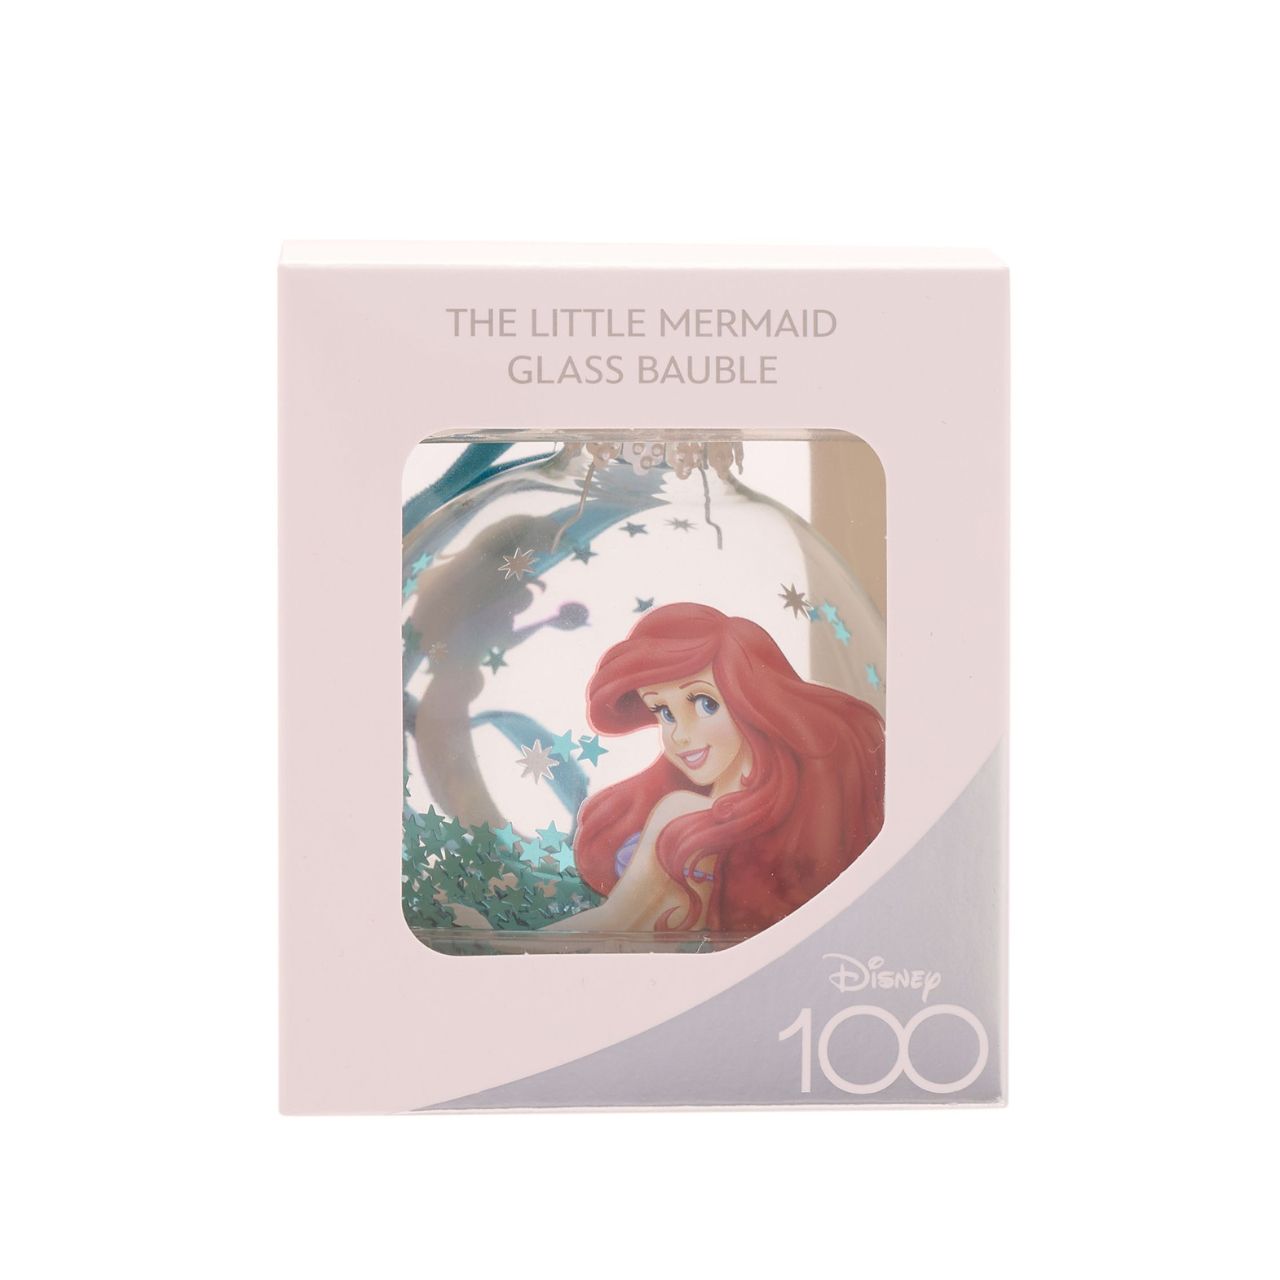 Disney 100th Anniversary Bauble - Ariel  An Ariel glass bauble from Disney 100 by DISNEY.  This limited edition tree decoration captures the true magic of Disney on its centenary and can be enjoyed by fans of all ages at Christmas.